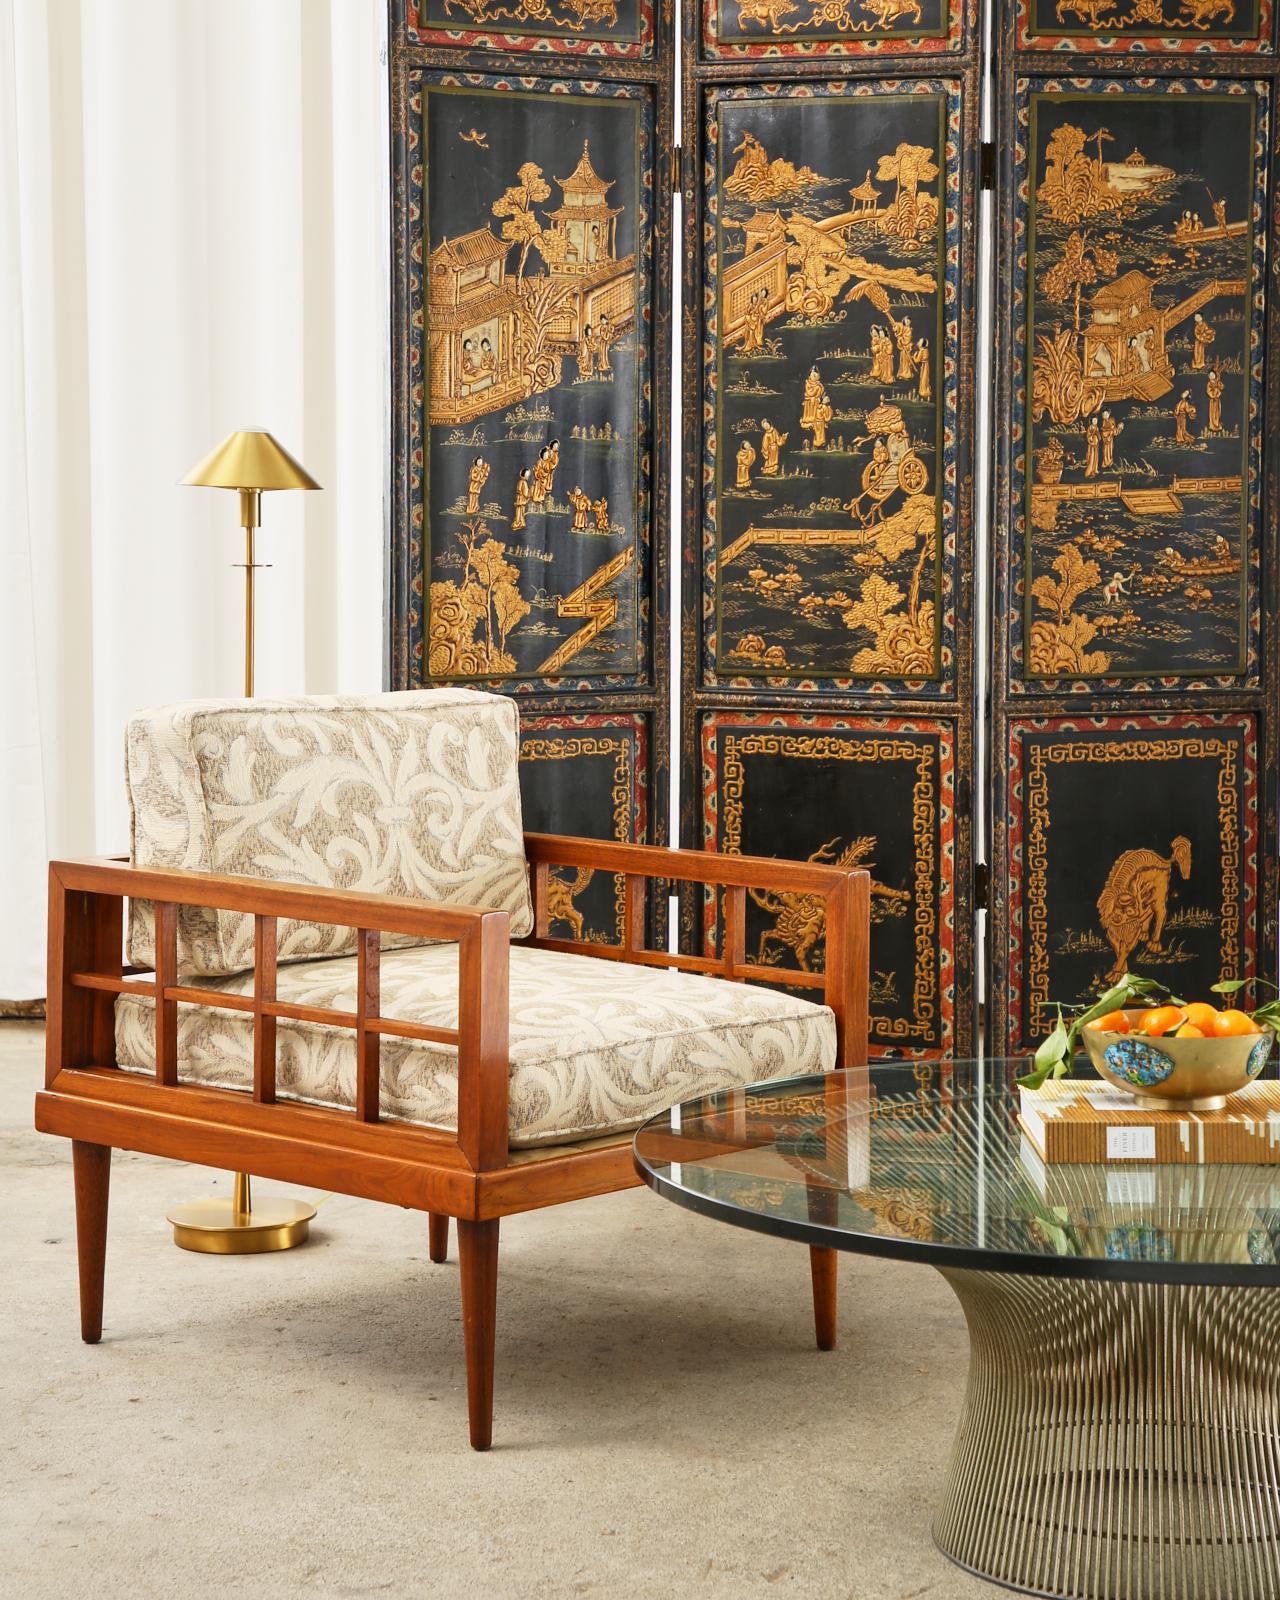 Colorful 20th century lacquered coromandel screen from China. The four panel screen features raised panels painted with idyllic scenes in parcel gilt and color pigments. The top and bottom windows are decorated with mythical beasts having colorful